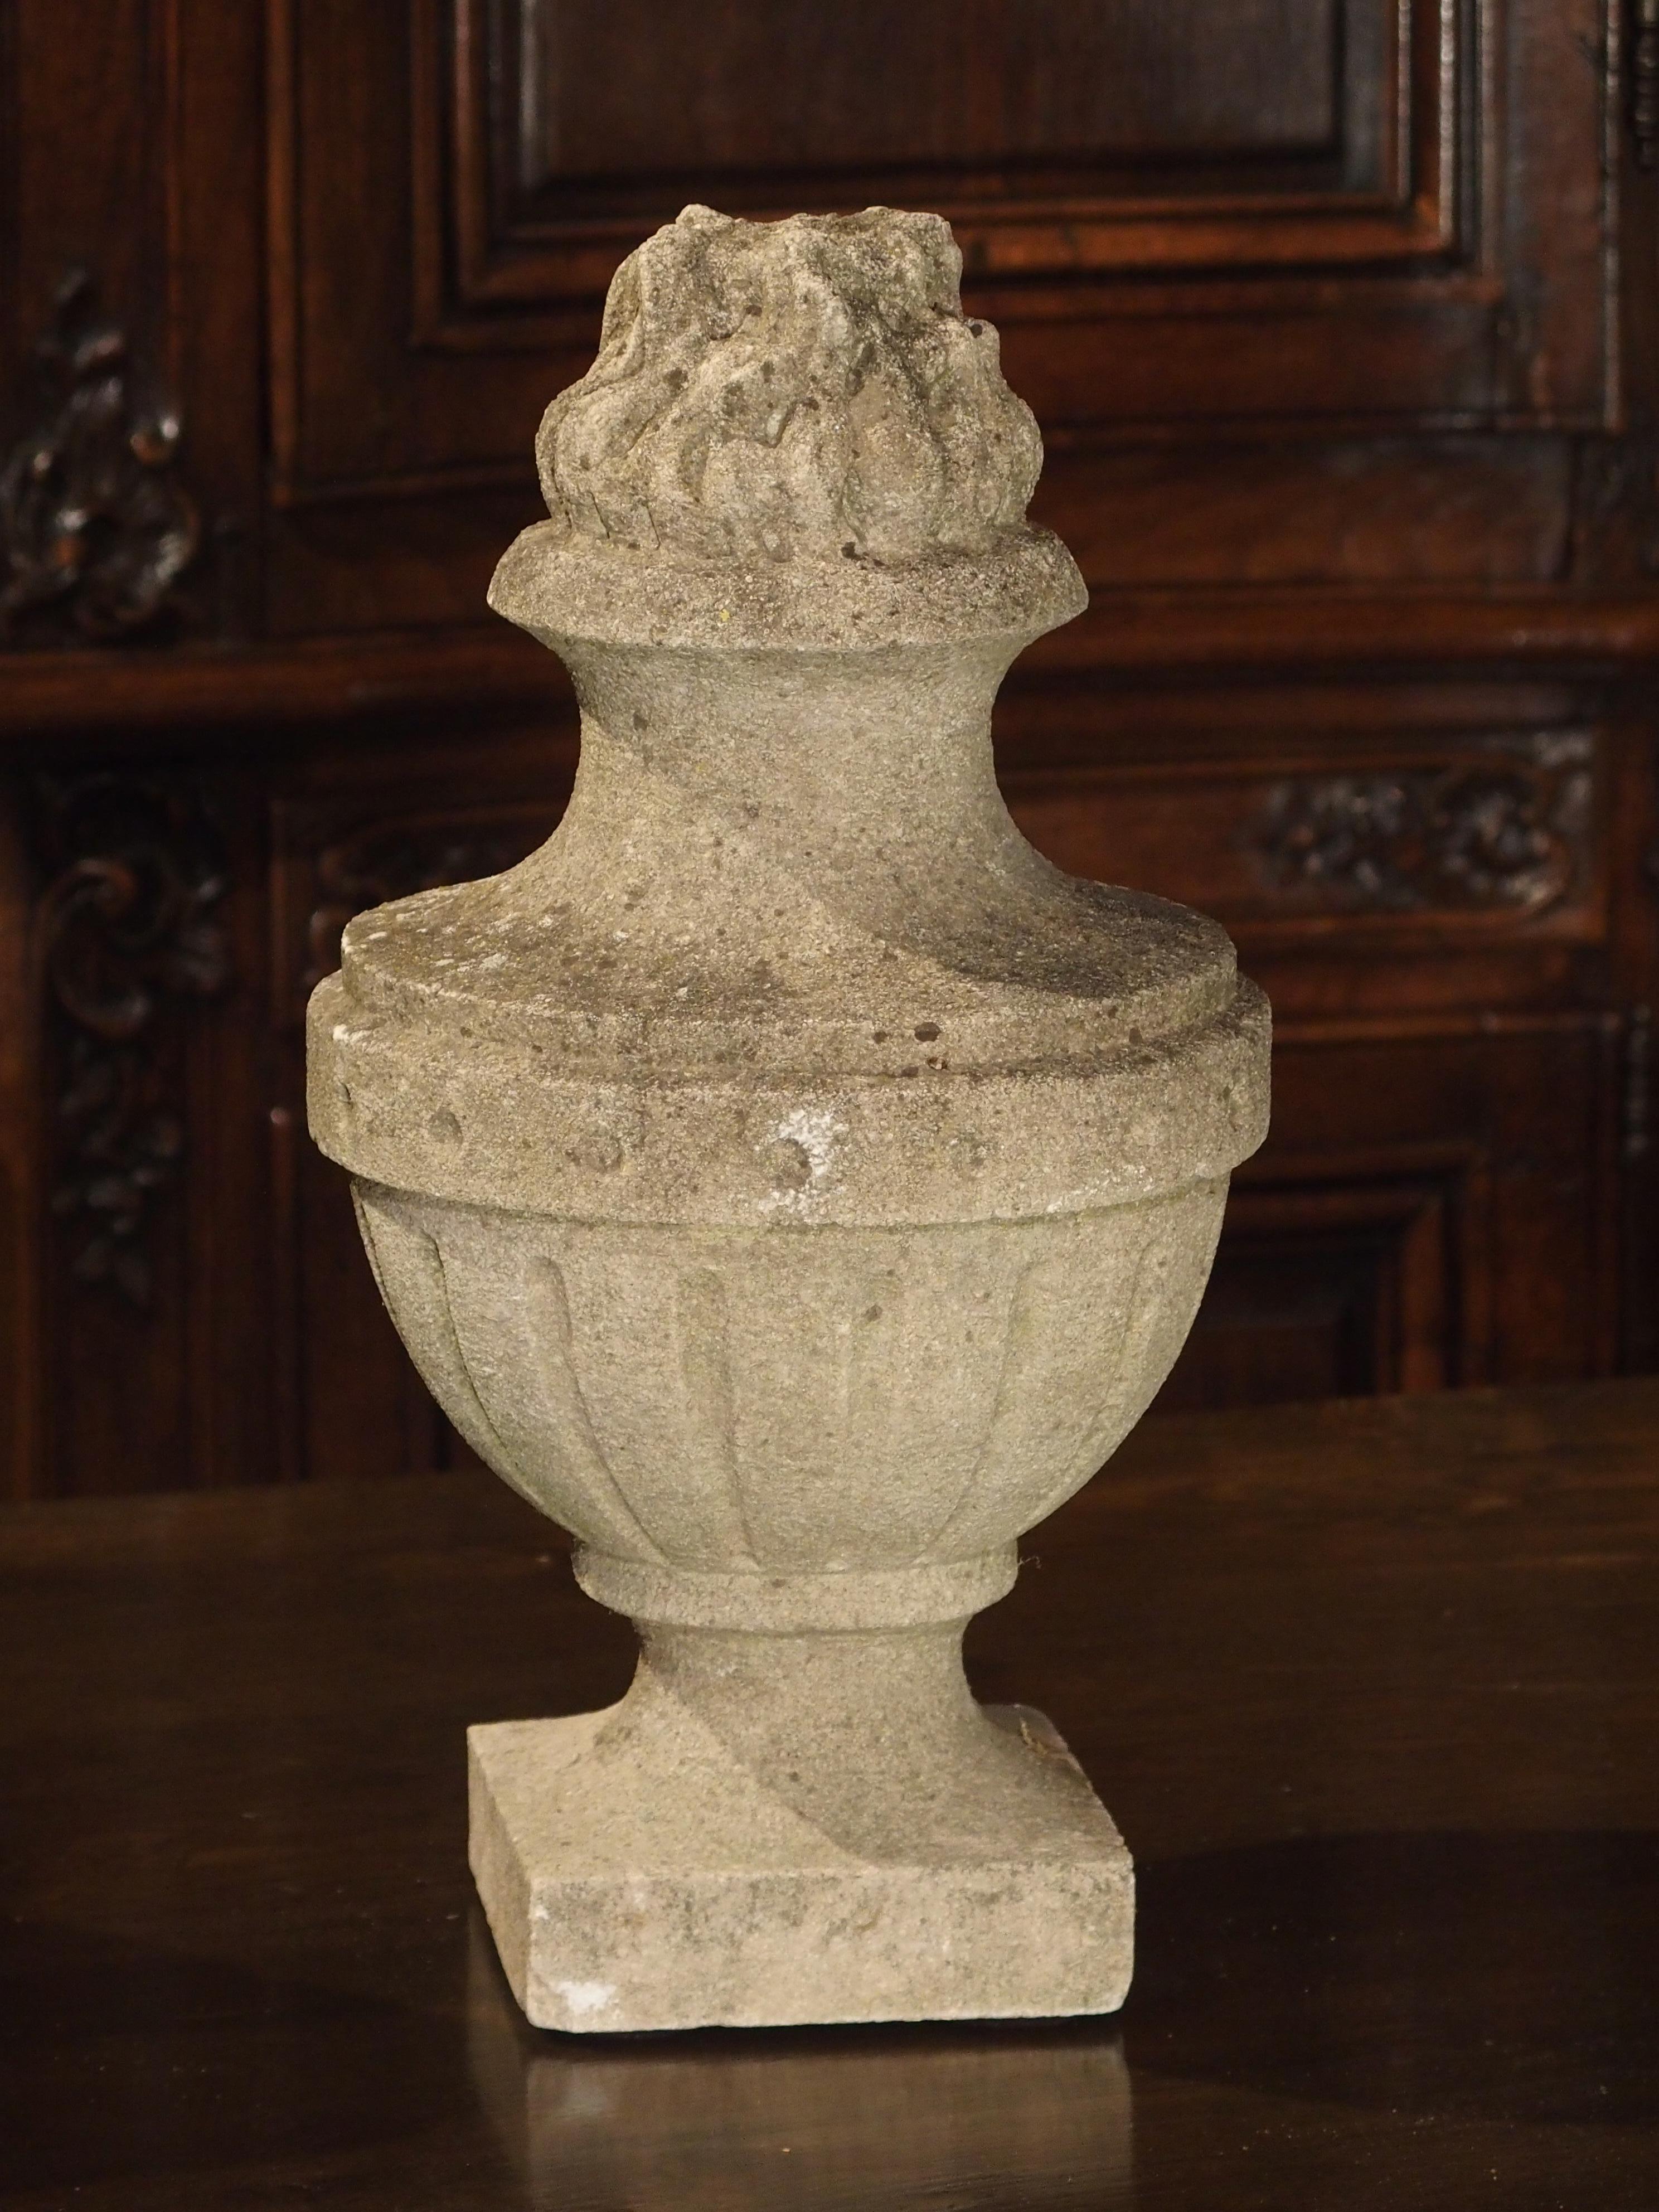 Pair of Carved Antique Limestone Pots a Feu from France, 19th Century (19. Jahrhundert)